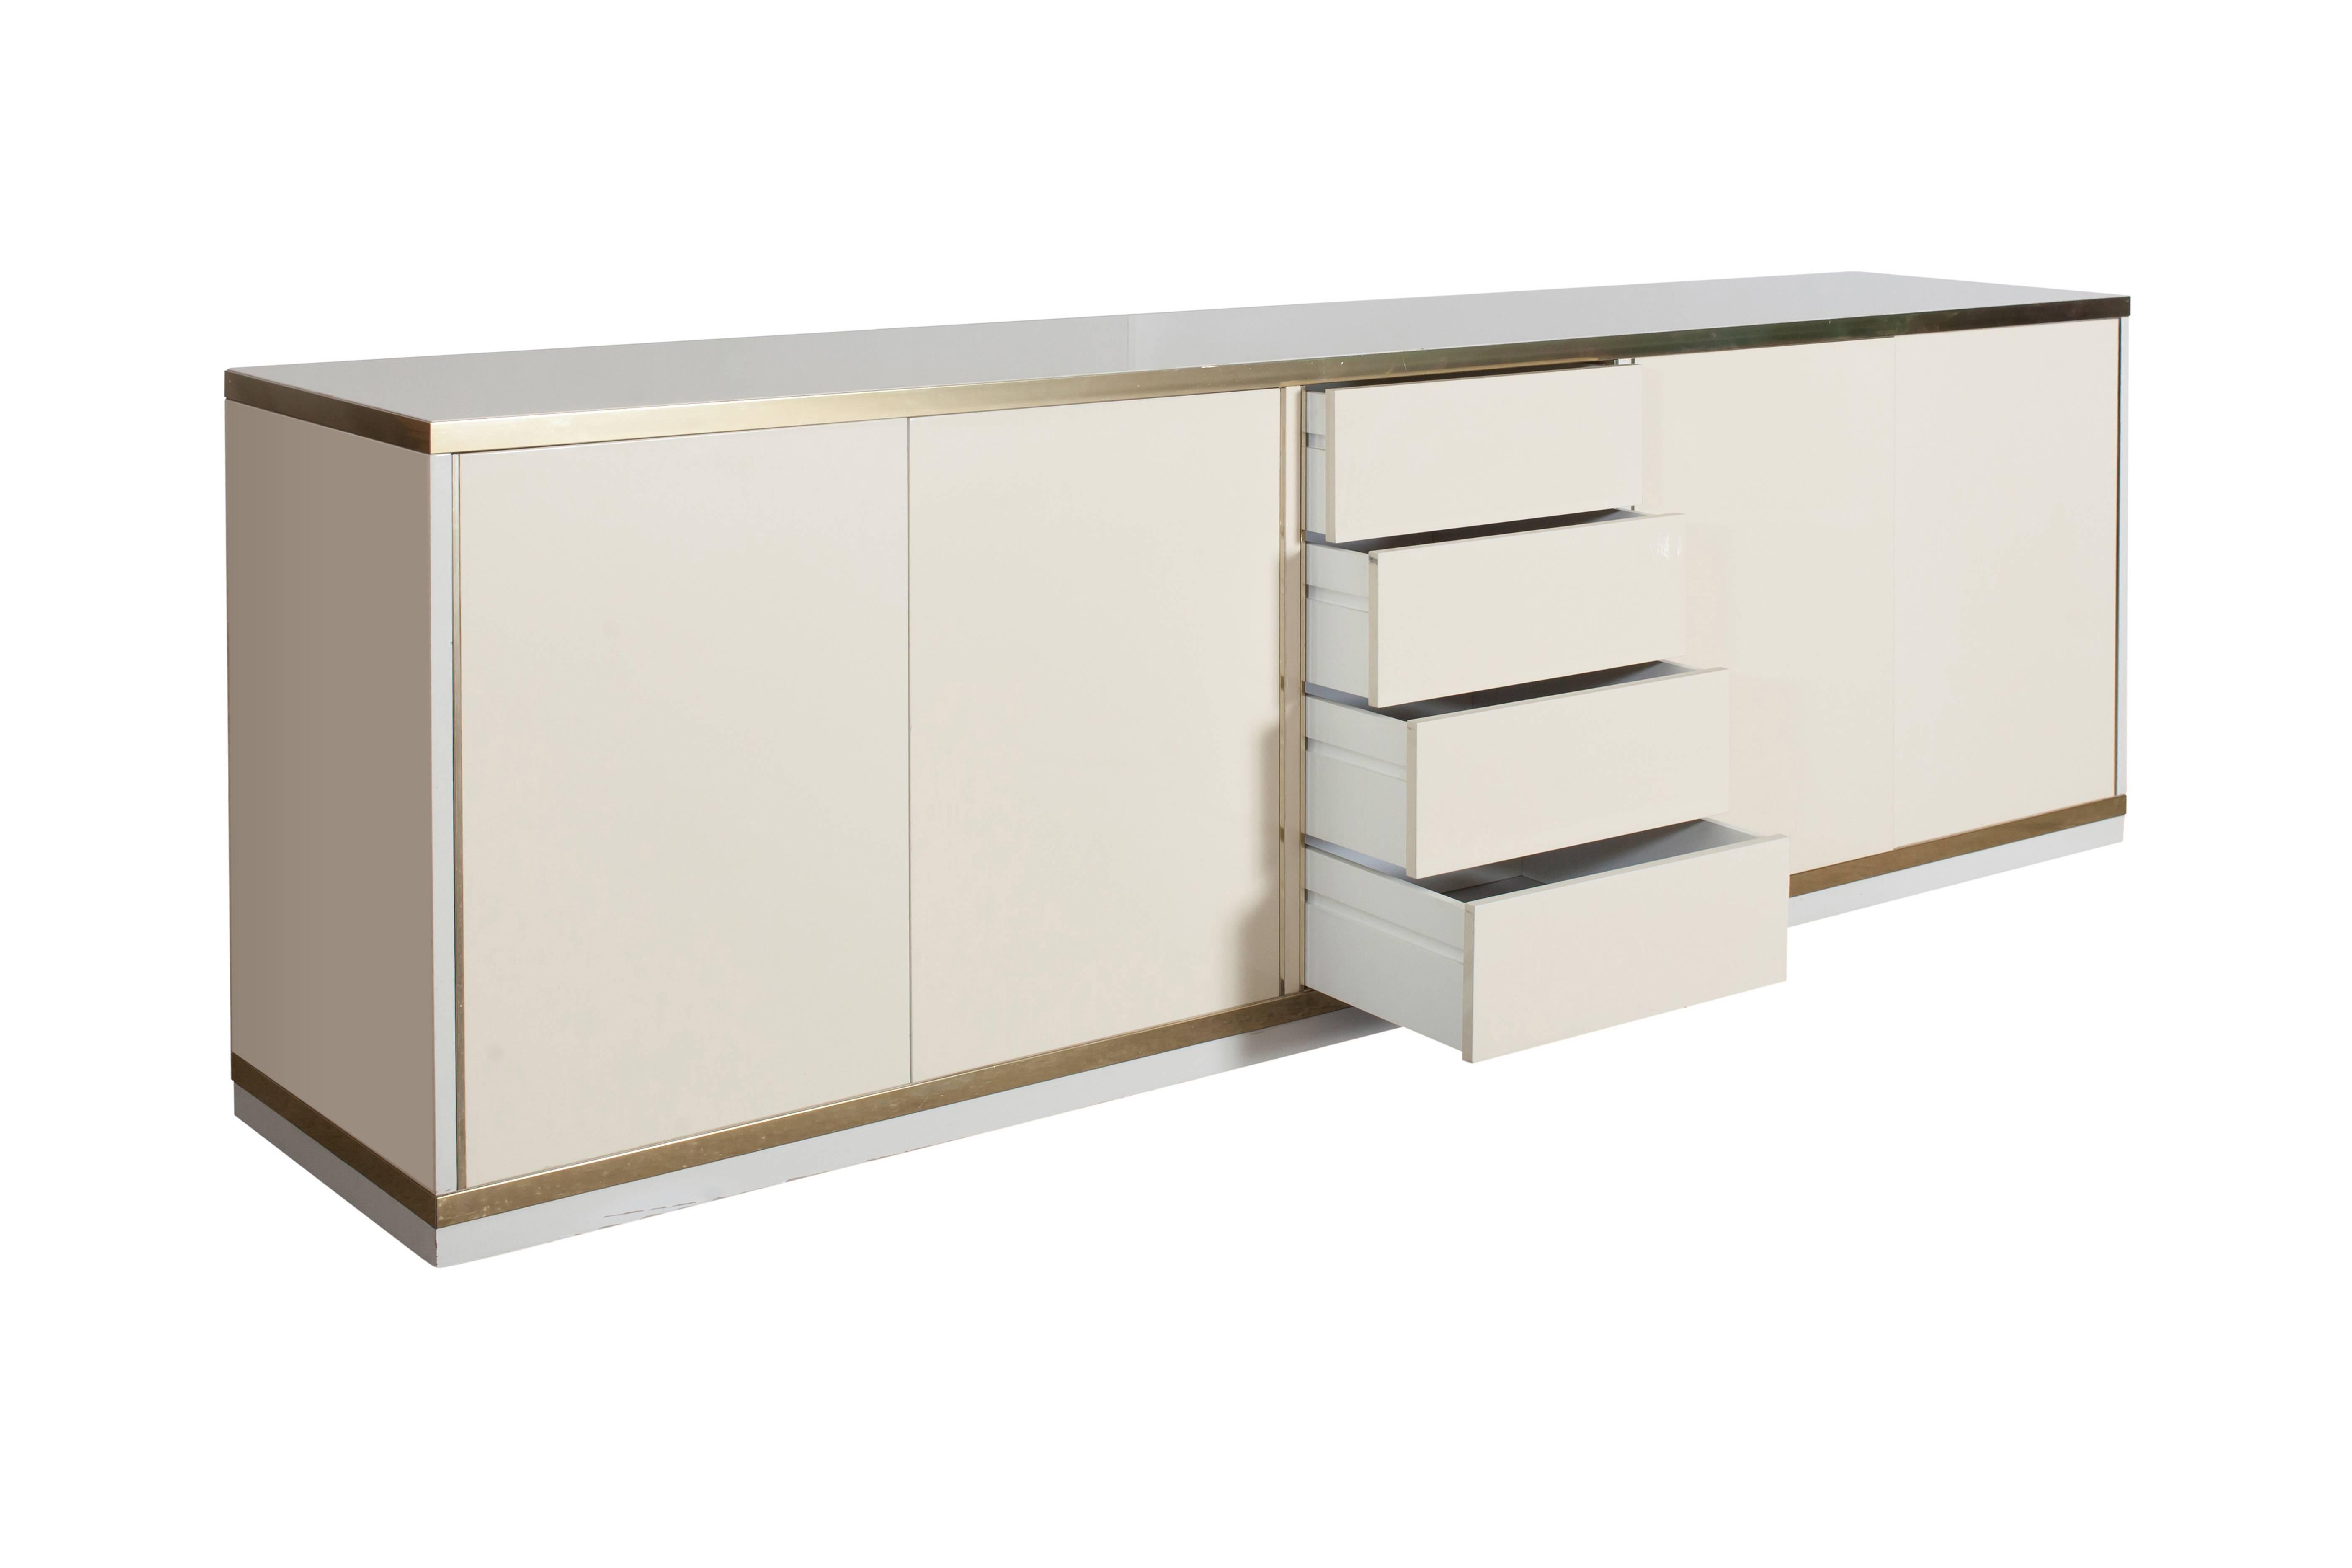 Willy Rizzo style Minimalist Mid-Century Modern sideboard by Mario Sabot, Italy, 1980s
two-tone white lacquer piece with brass details. The credenza is finished front to back so can be used as center piece in the middle of a room.